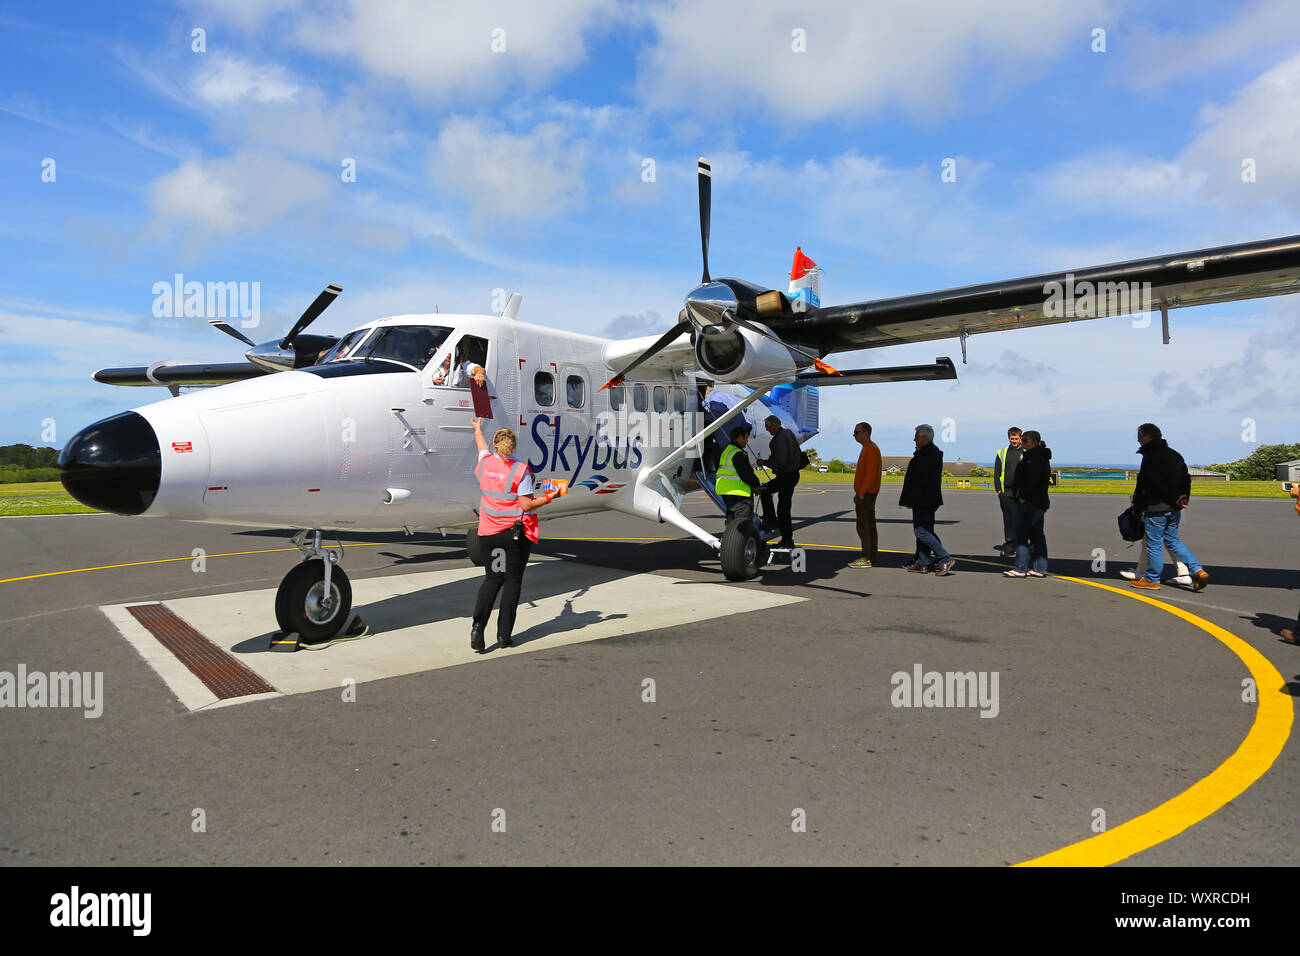 People boarding a de Havilland Canada DHC-6 Twin Otter, Skybus call sign G-BIHO, at St Marys airport, St Marys, Isles of Scilly, Cornwall, England, UK Stock Photo